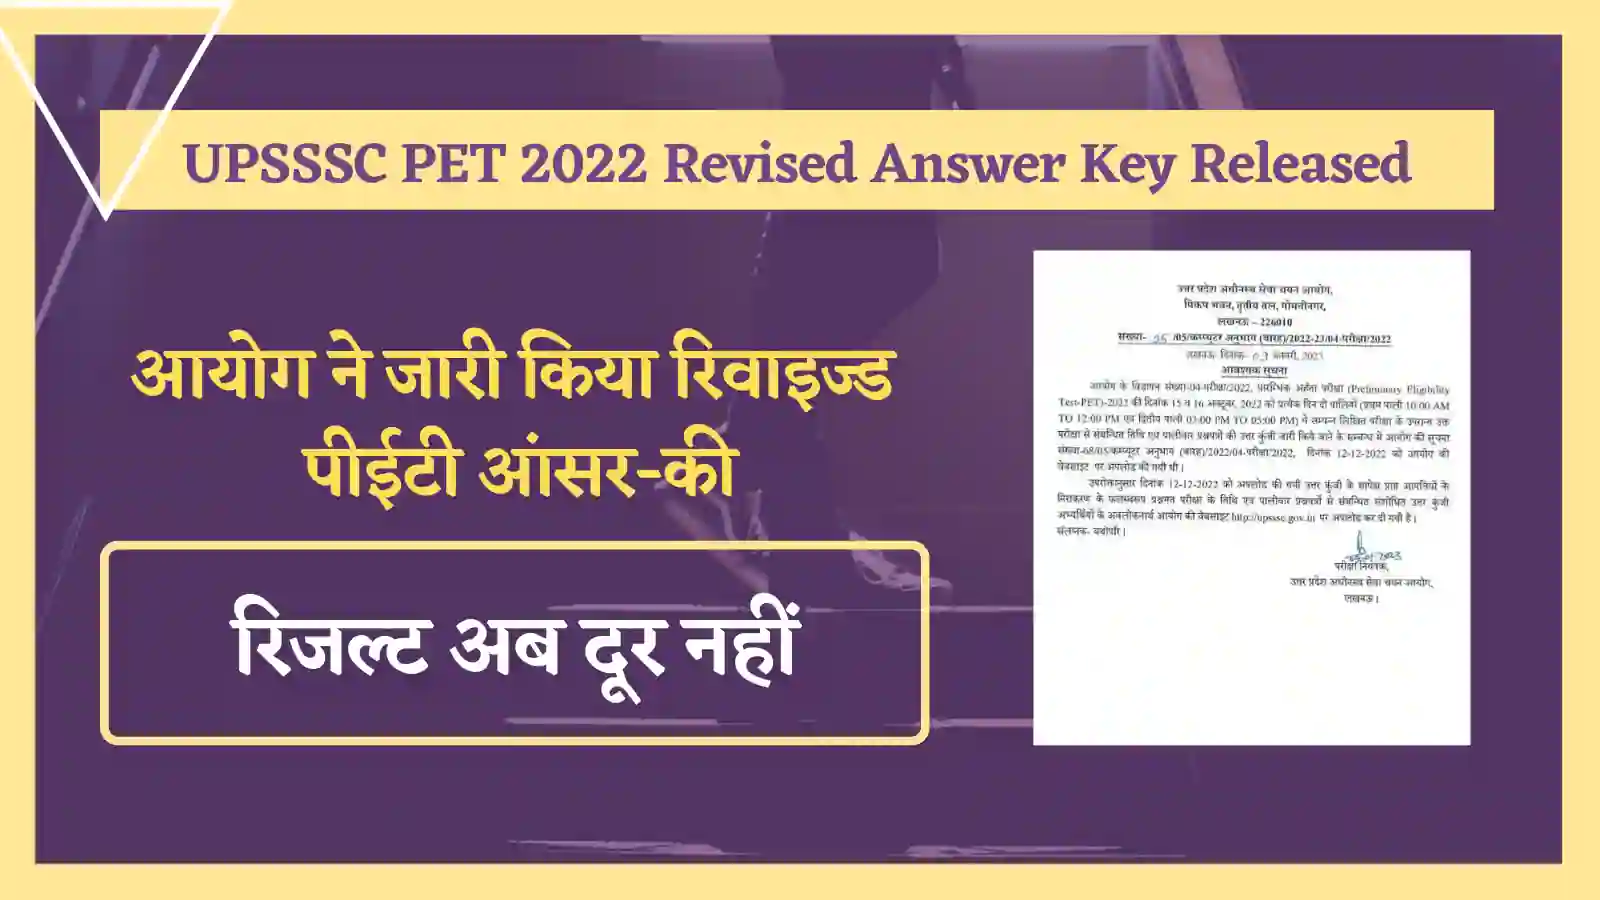 UPSSSC PET 2022 Revised Answer Key Released